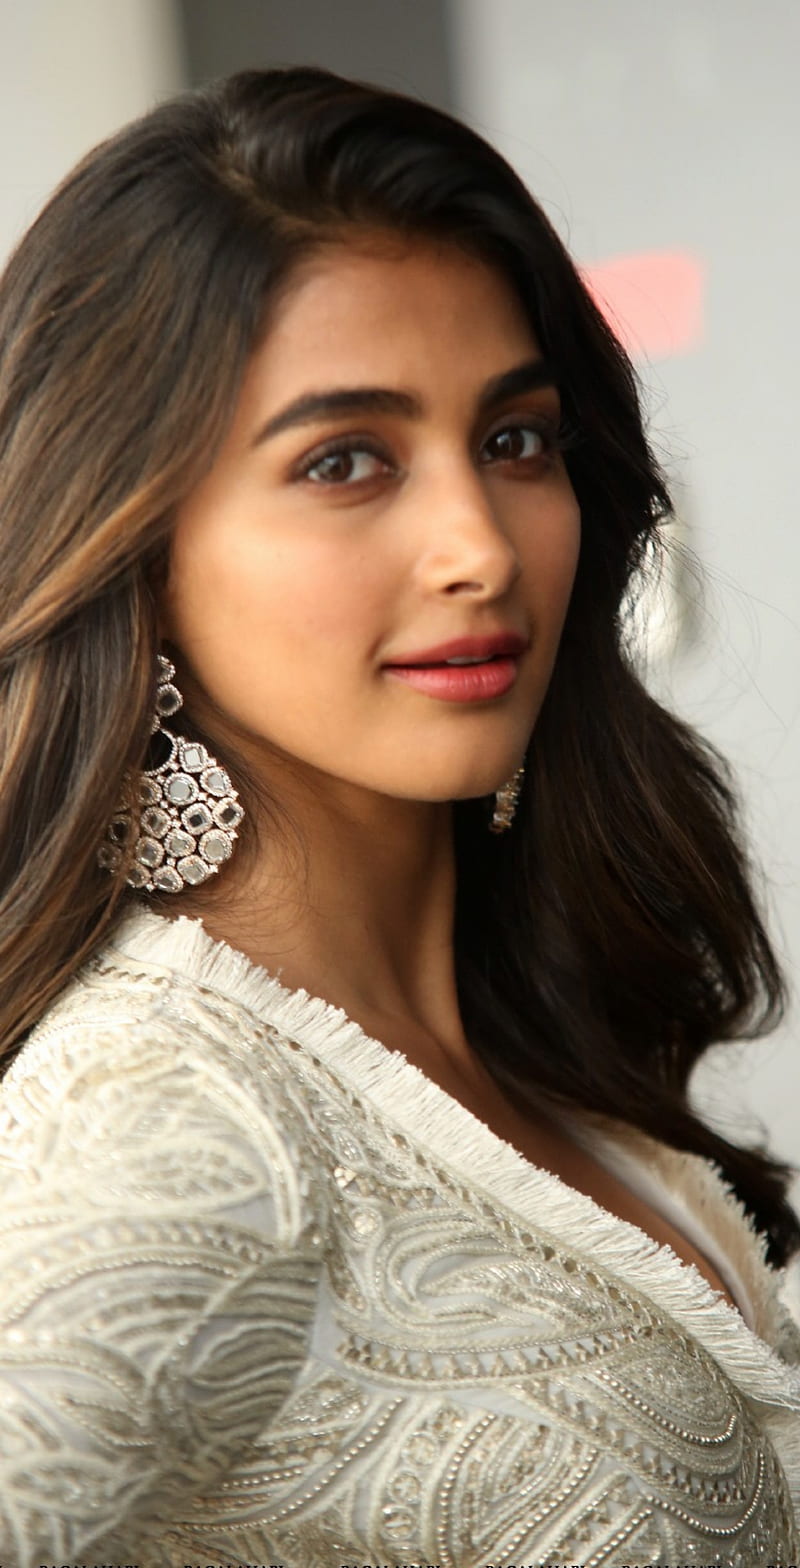 Top 999+ pooja hegde hd images – Amazing Collection pooja hegde hd images Full 4K